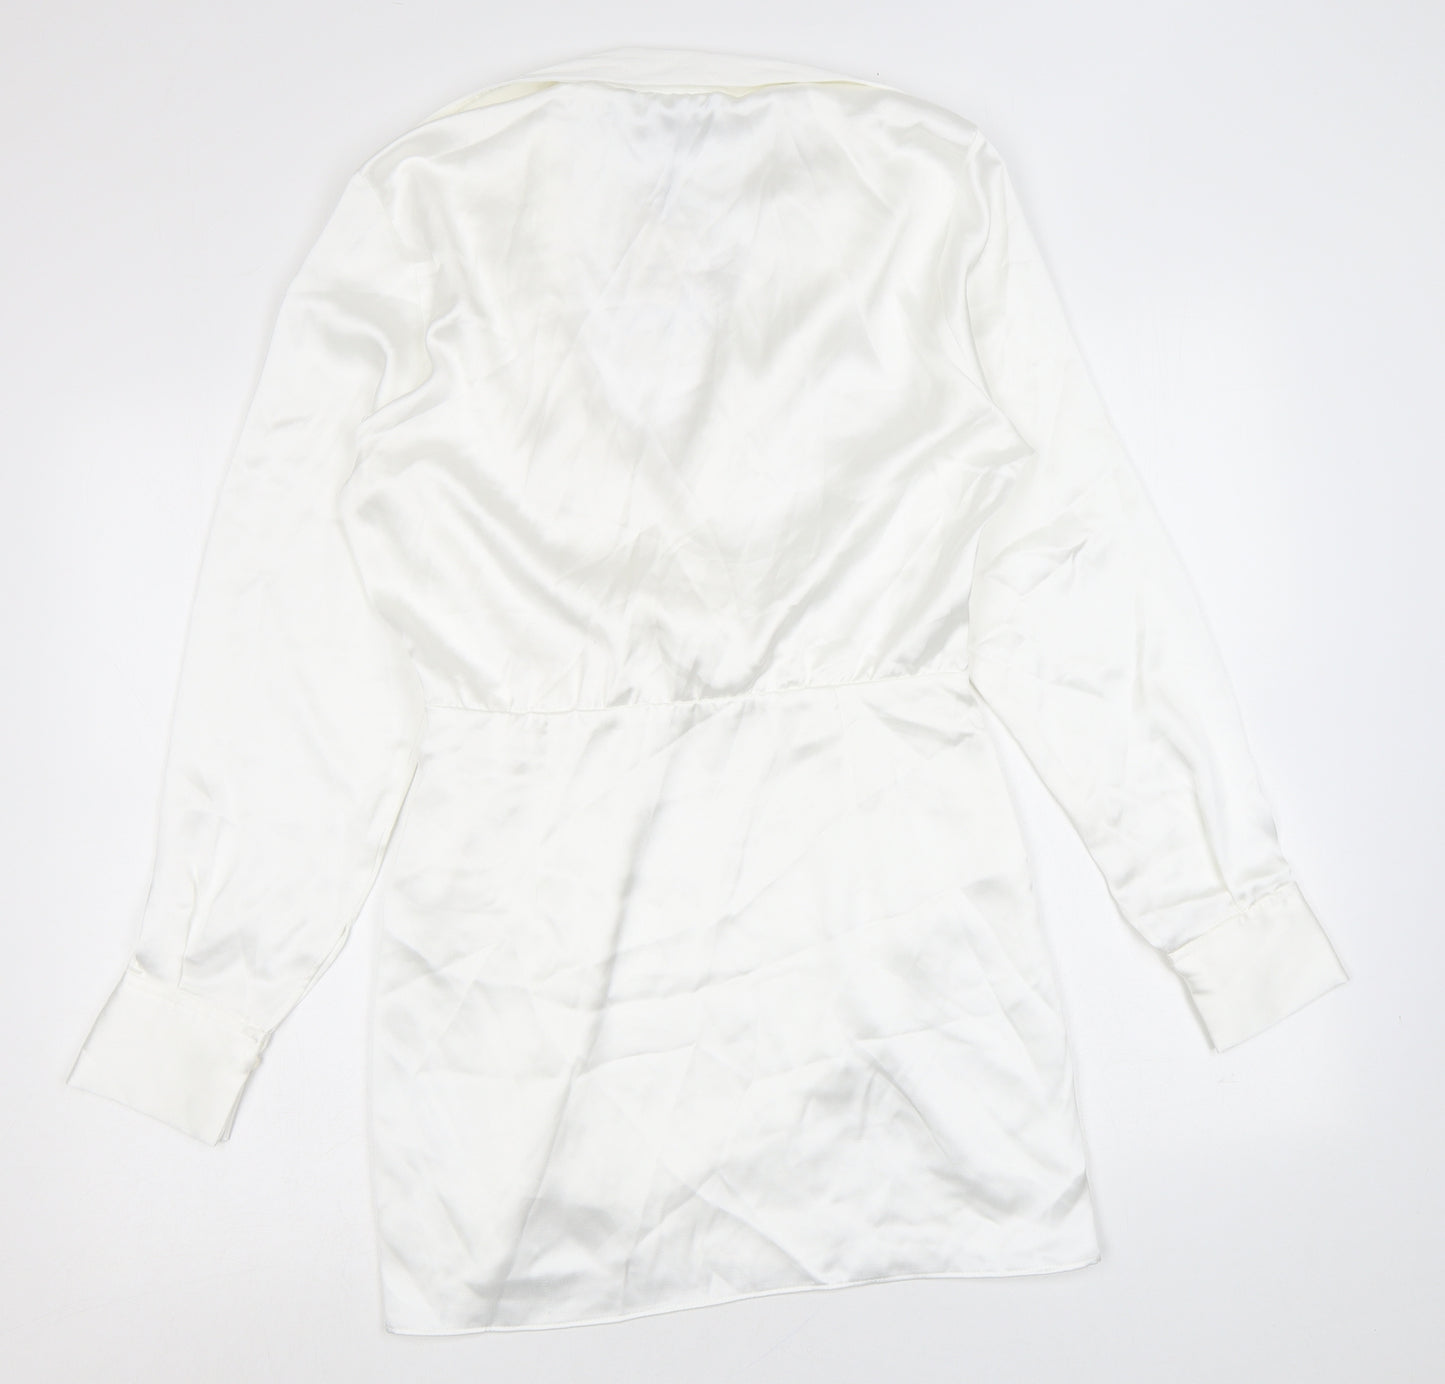 Zara Womens White Polyester A-Line Size S Collared Zip